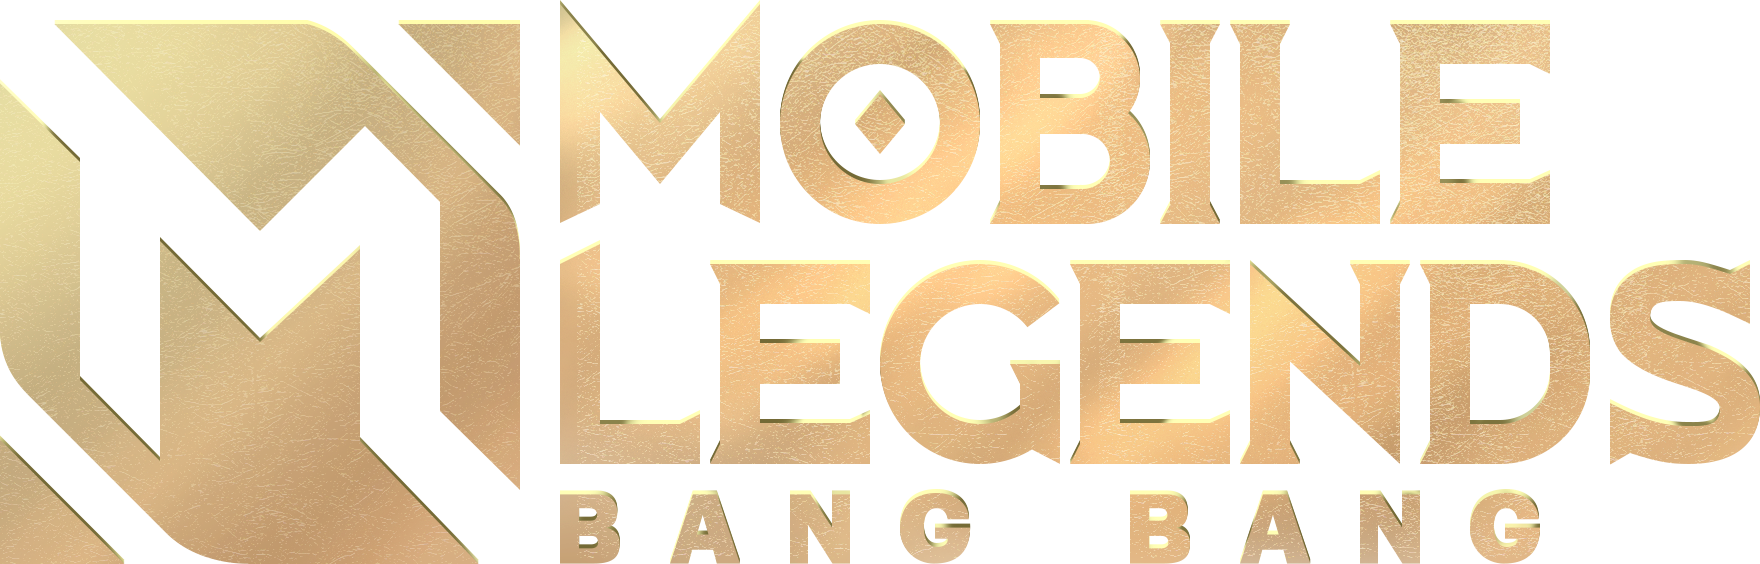 With a new logo, Mobile Legends: Bang Bang is also preparing a series